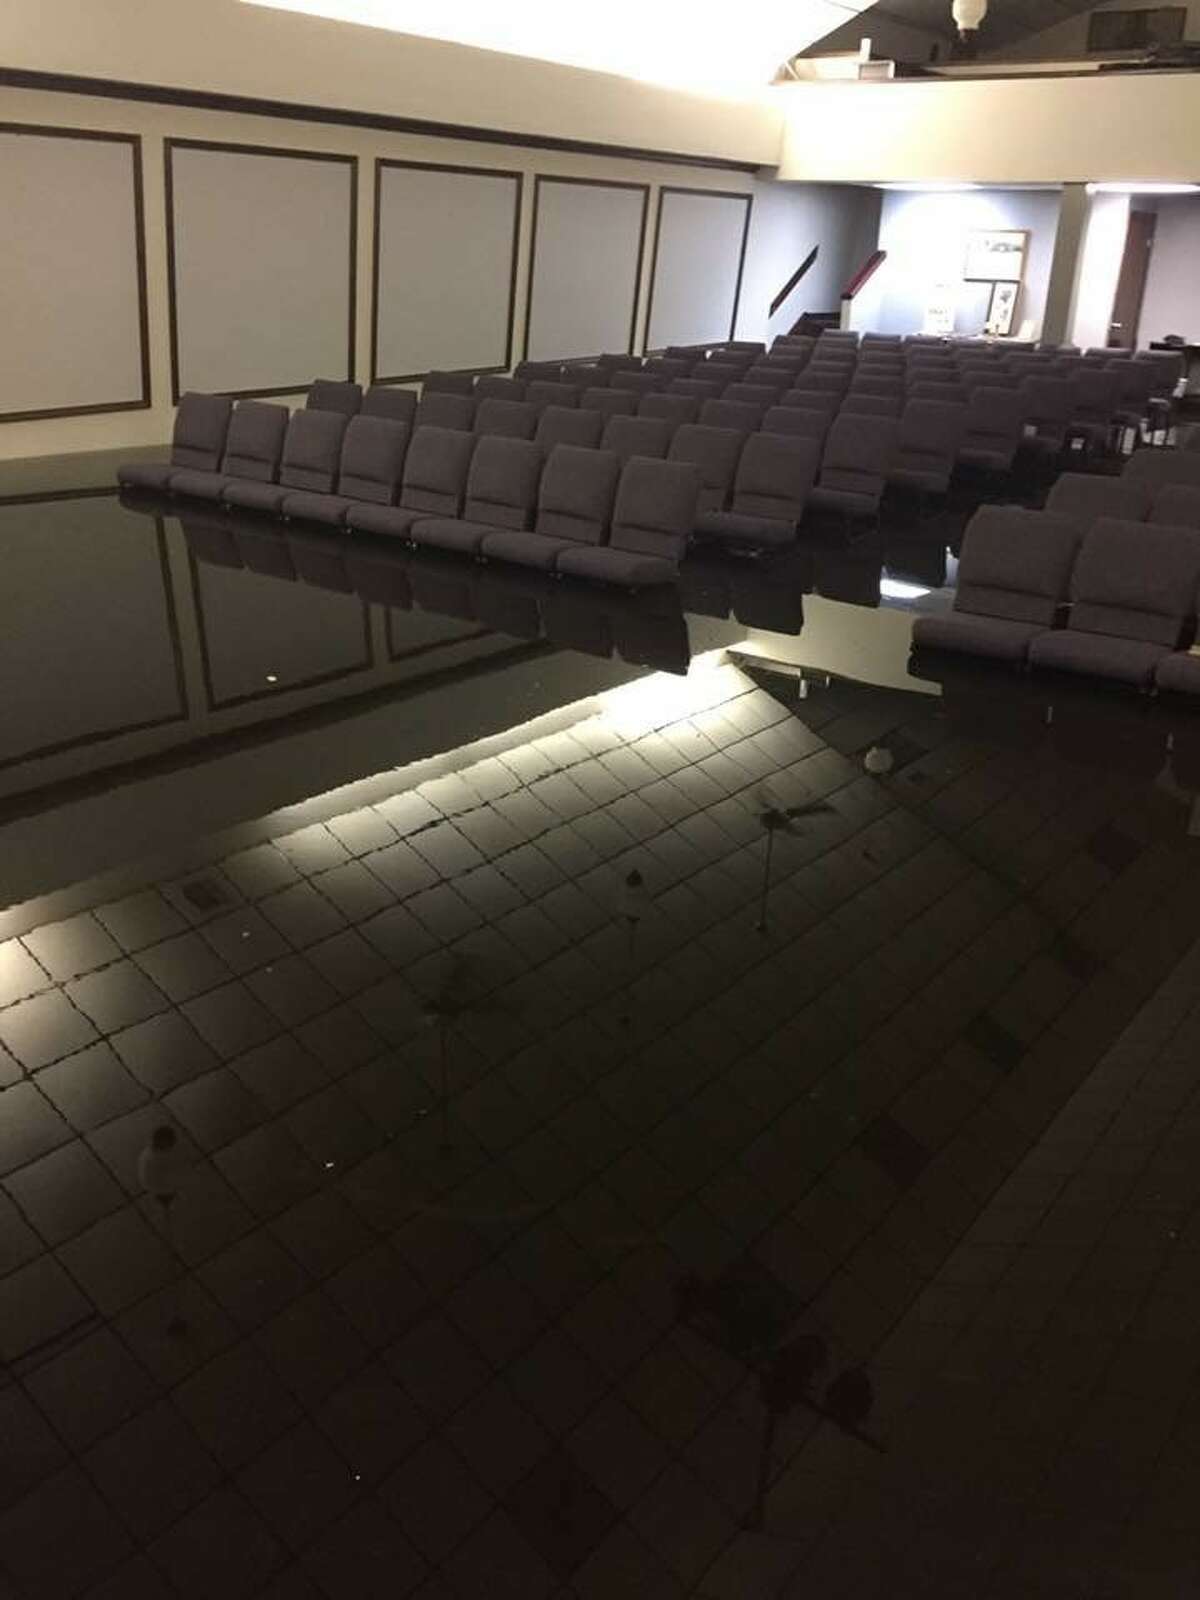 The sanctuary at Hi-Way Tabernacle is pictured after it sustained damage during Hurricane Harvey.